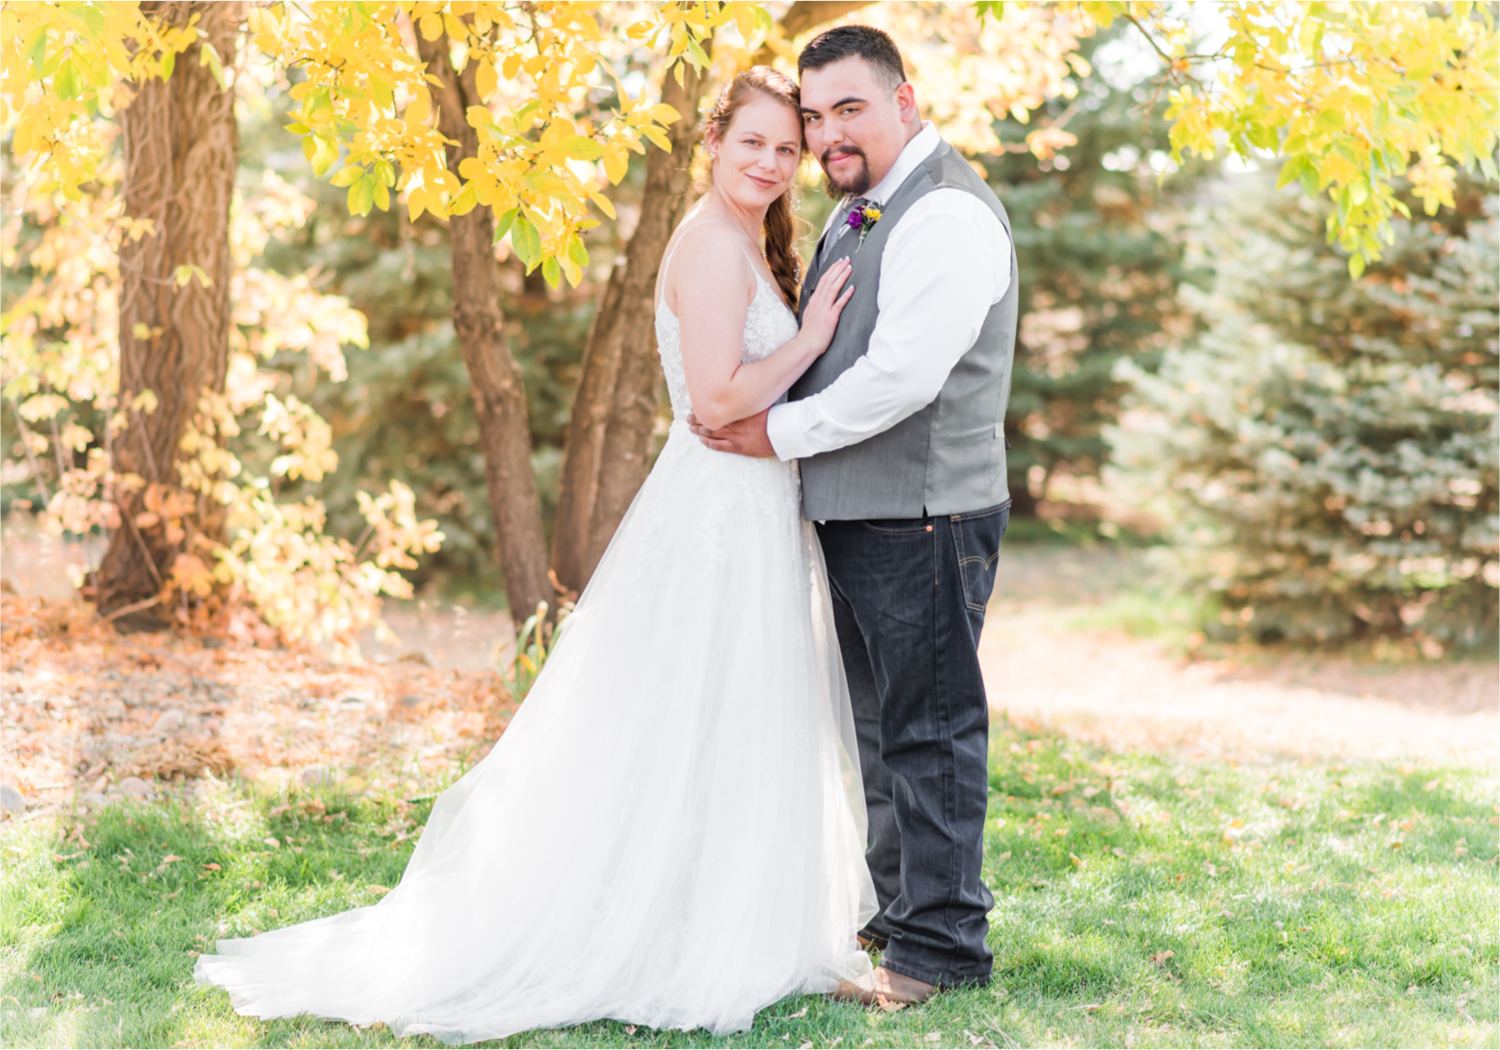 Rustic Fall Wedding in the Country | Britni Girard Photography | Colorado Wedding Photography and Videography Team